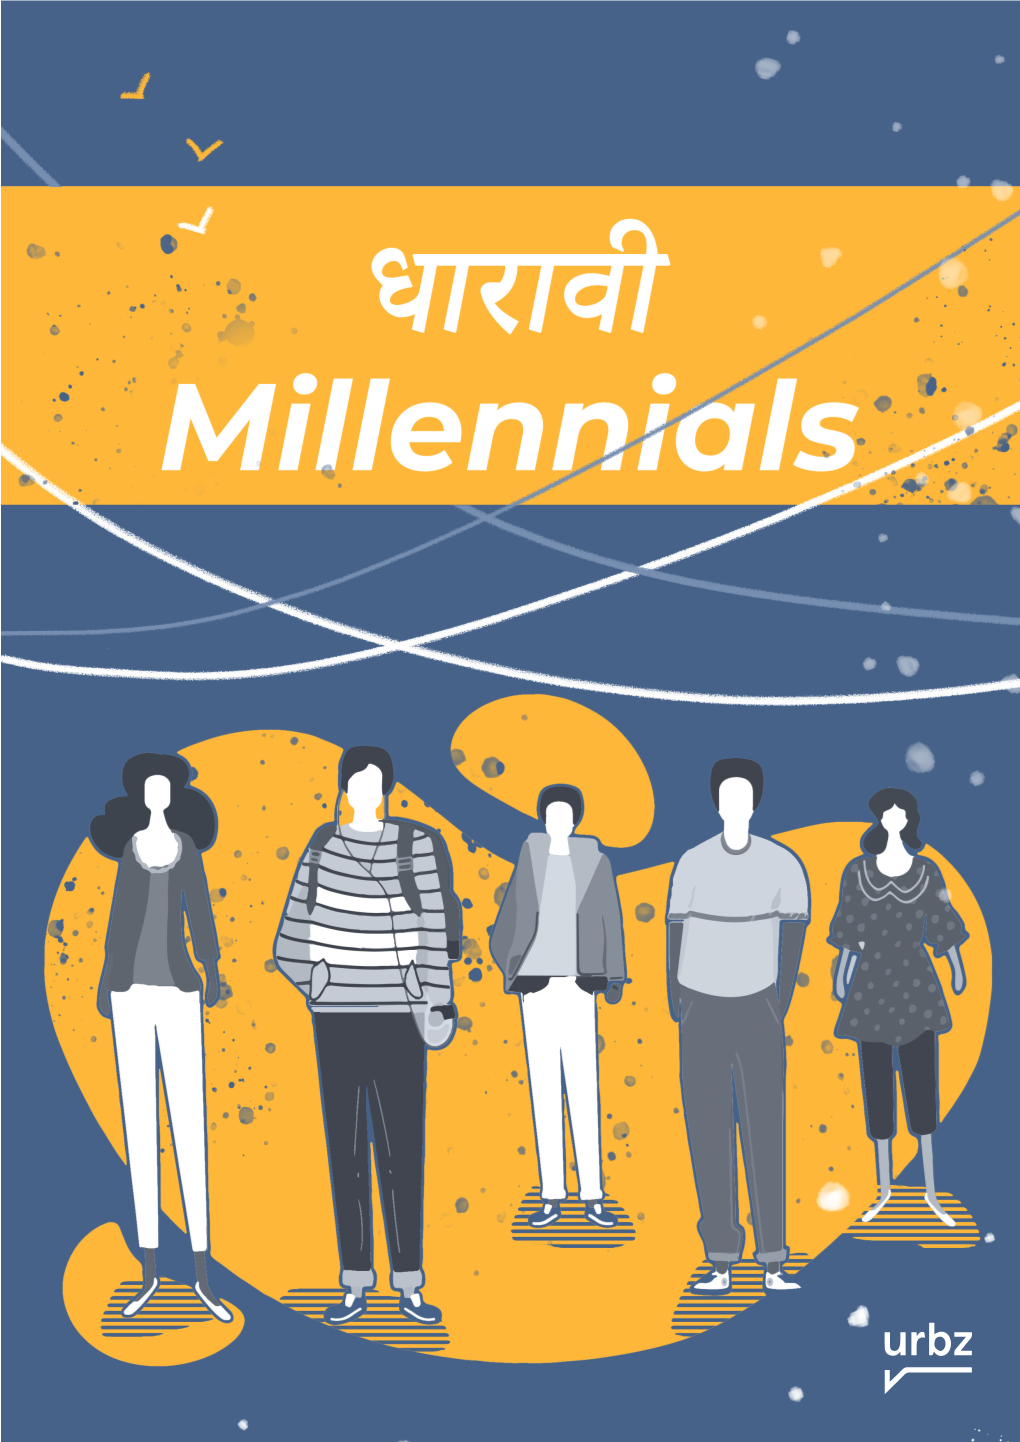 Dharavi Millennials Model Is for Addressing Middle-Class Entrepreneurs Who Cannot Find an Alternative Workspace